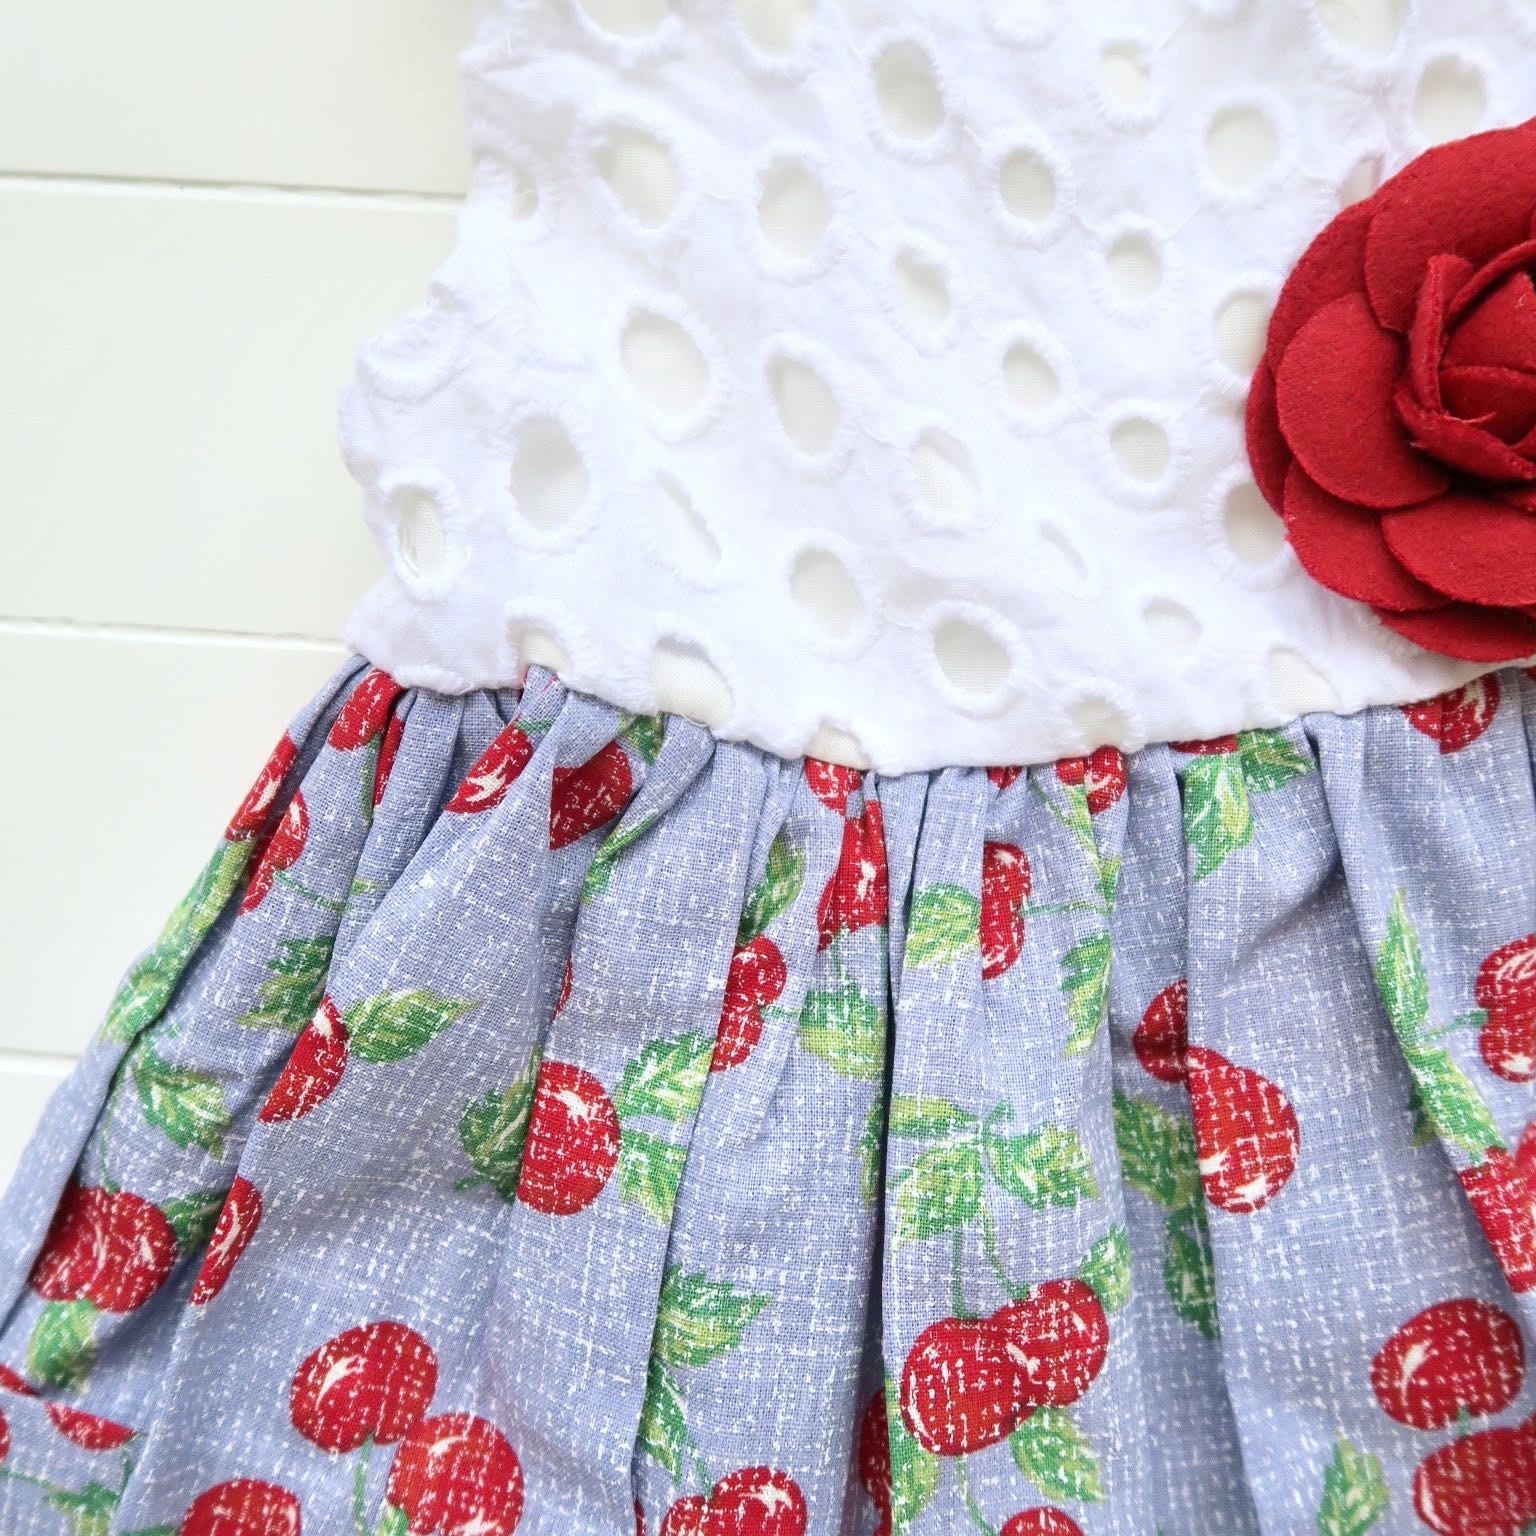 Poppy Dress in White Embroidery and Sky Cherries - Lil' Tati